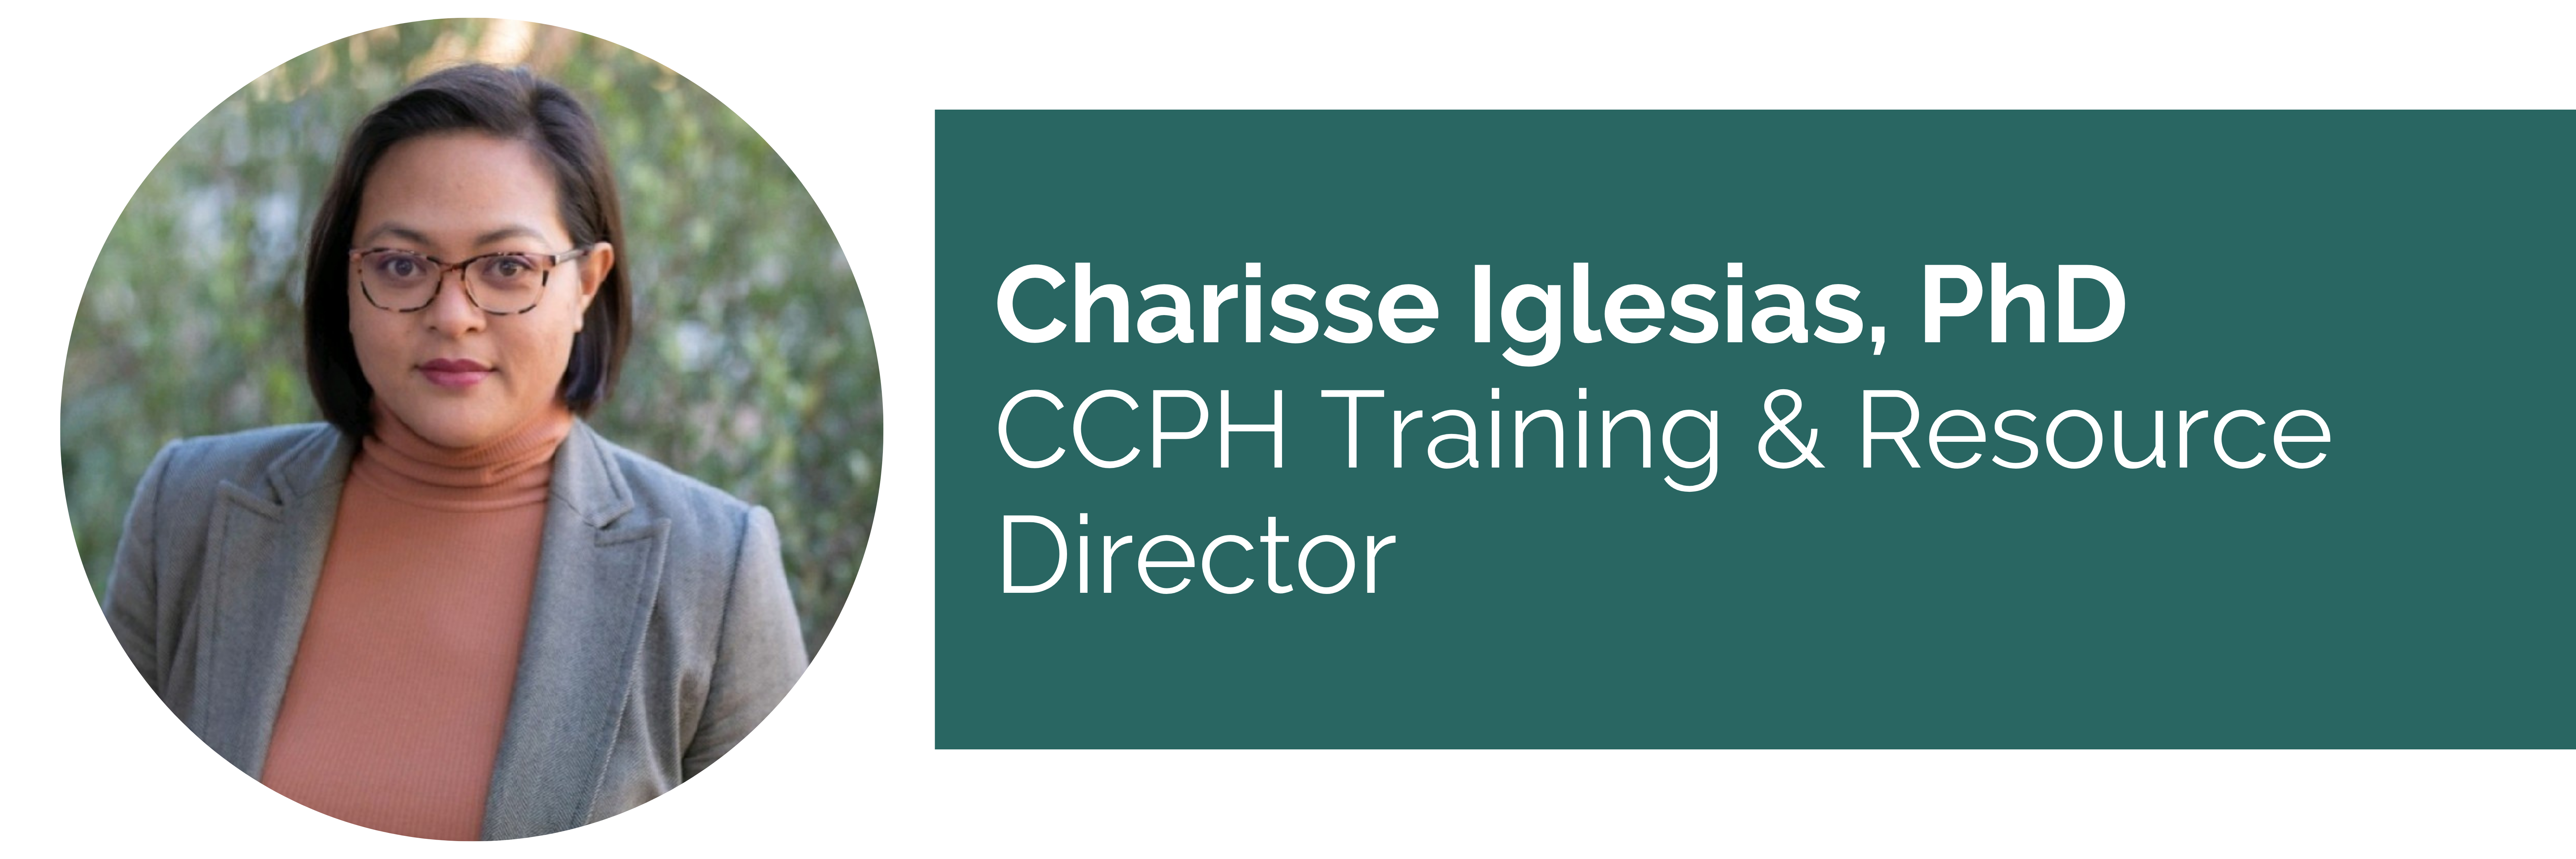 Banner graphic with picture of Charisse Iglesias, PhD, CCPH Training & Resource Director